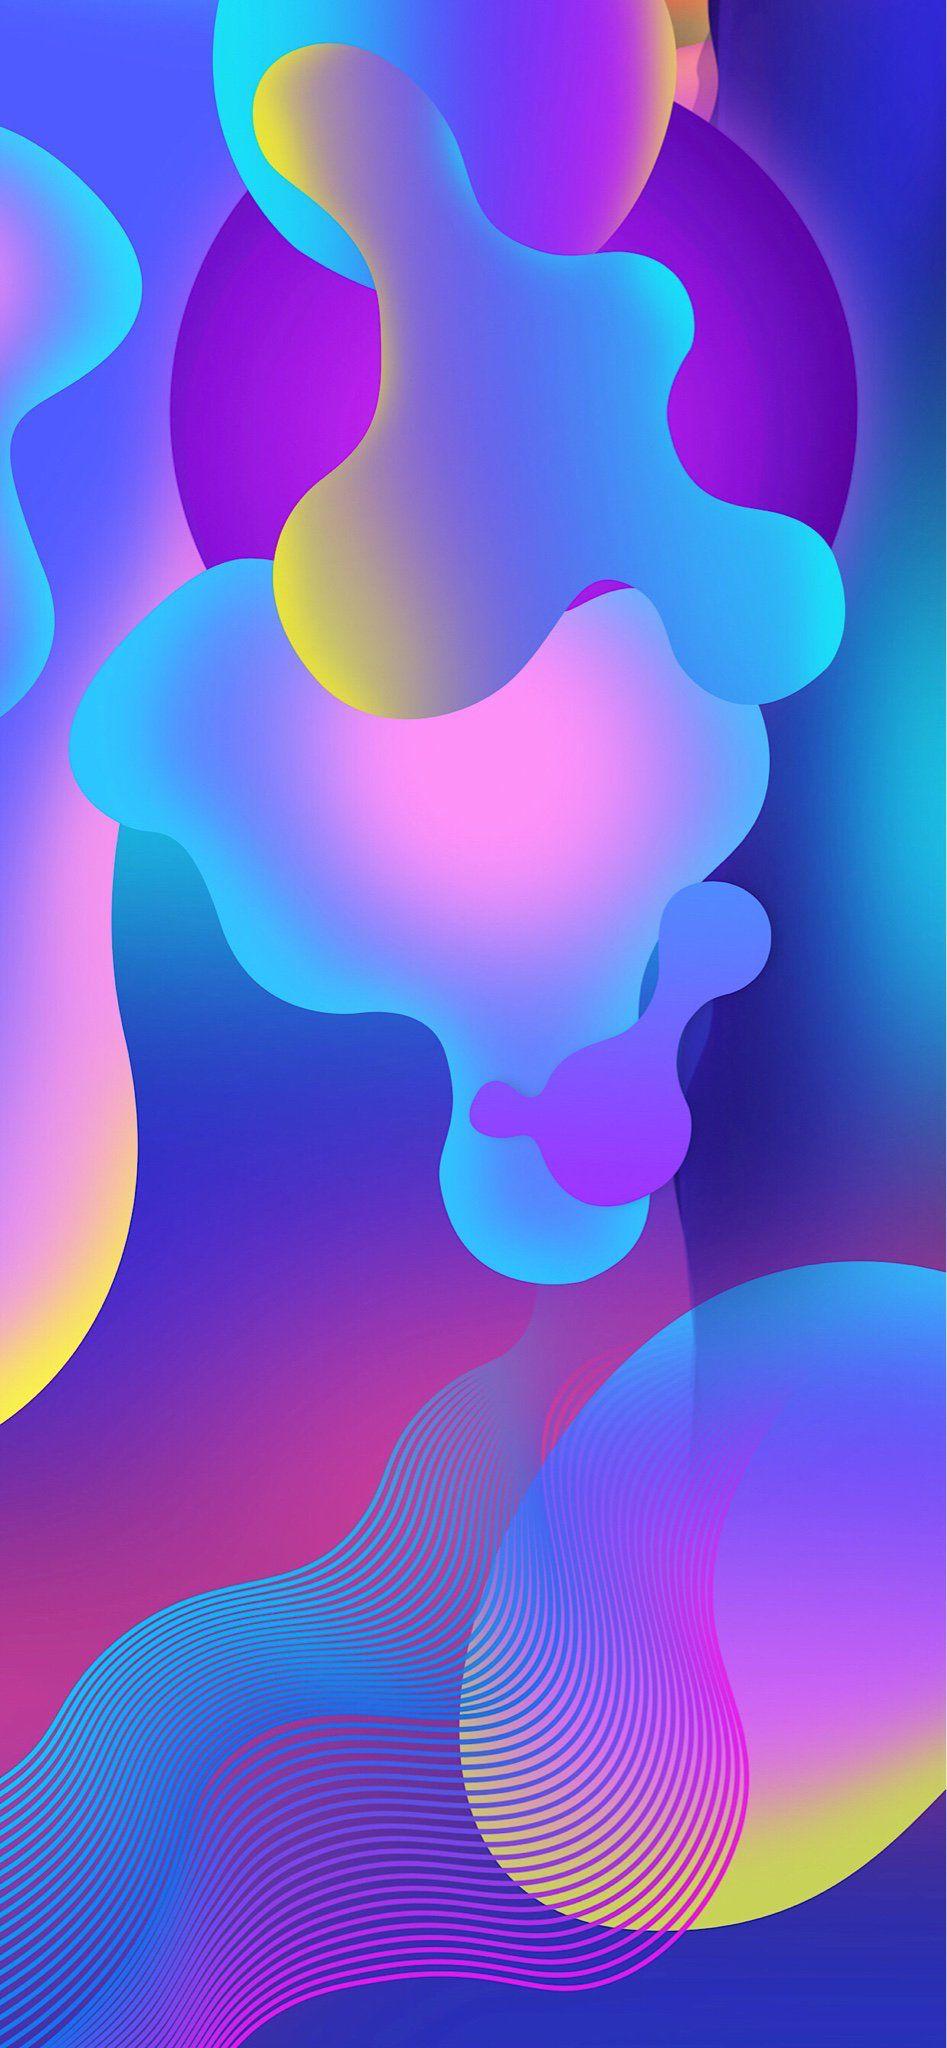 iPhone XS Max Wallpapers - Top Free iPhone XS Max ...